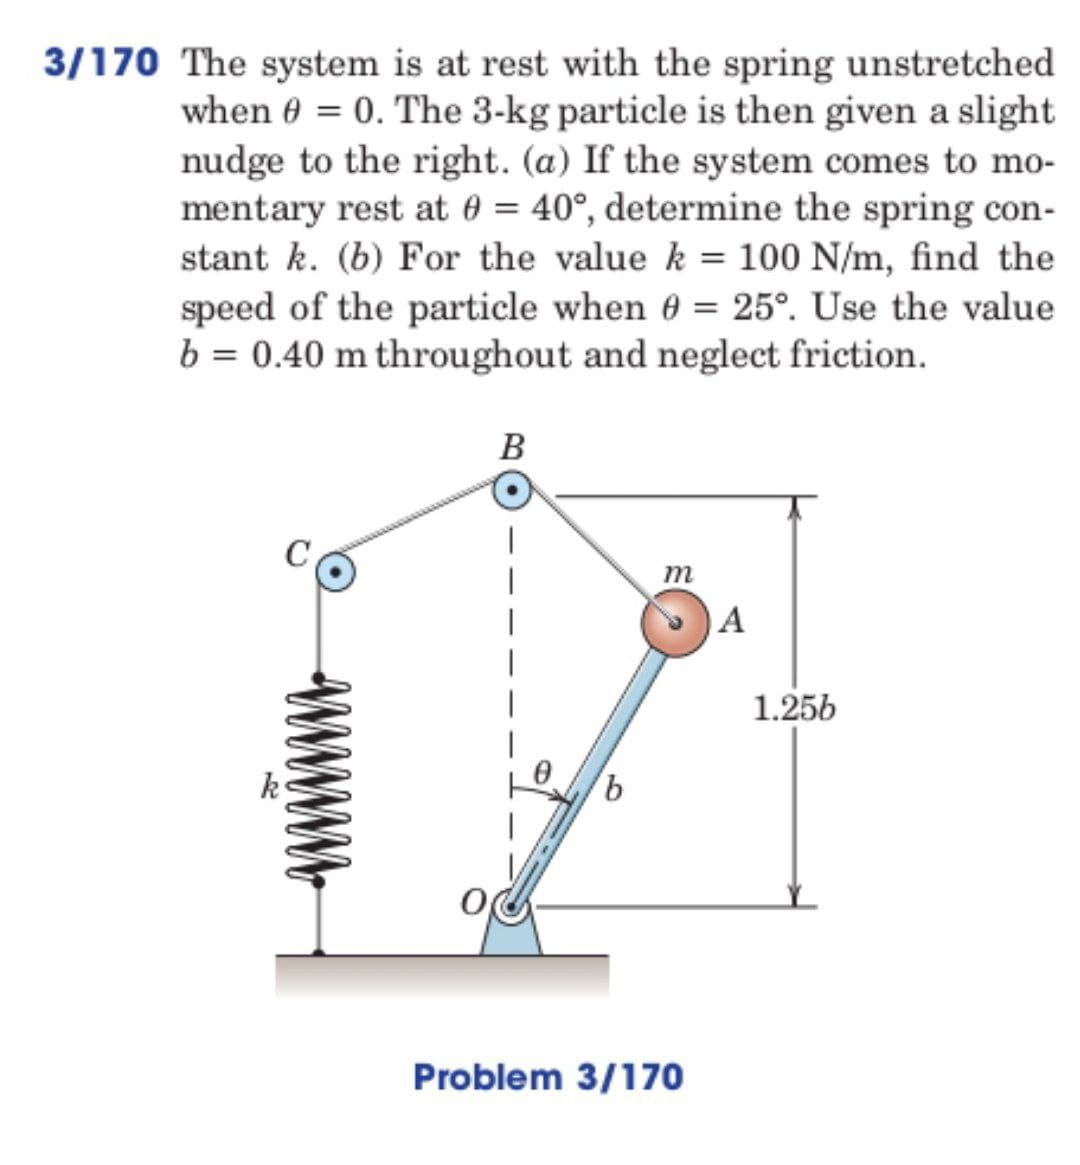 3/170 The system is at rest with the spring unstretched
when 0 = 0. The 3-kg particle is then given a slight
nudge to the right. (a) If the system comes to mo-
mentary rest at 0 = 40°, determine the spring con-
stant k. (b) For the value k = 100 N/m, find the
speed of the particle when 0 = 25°. Use the value
b = 0.40 m throughout and neglect friction.
C
B
b
m
Problem 3/170
A
1.256